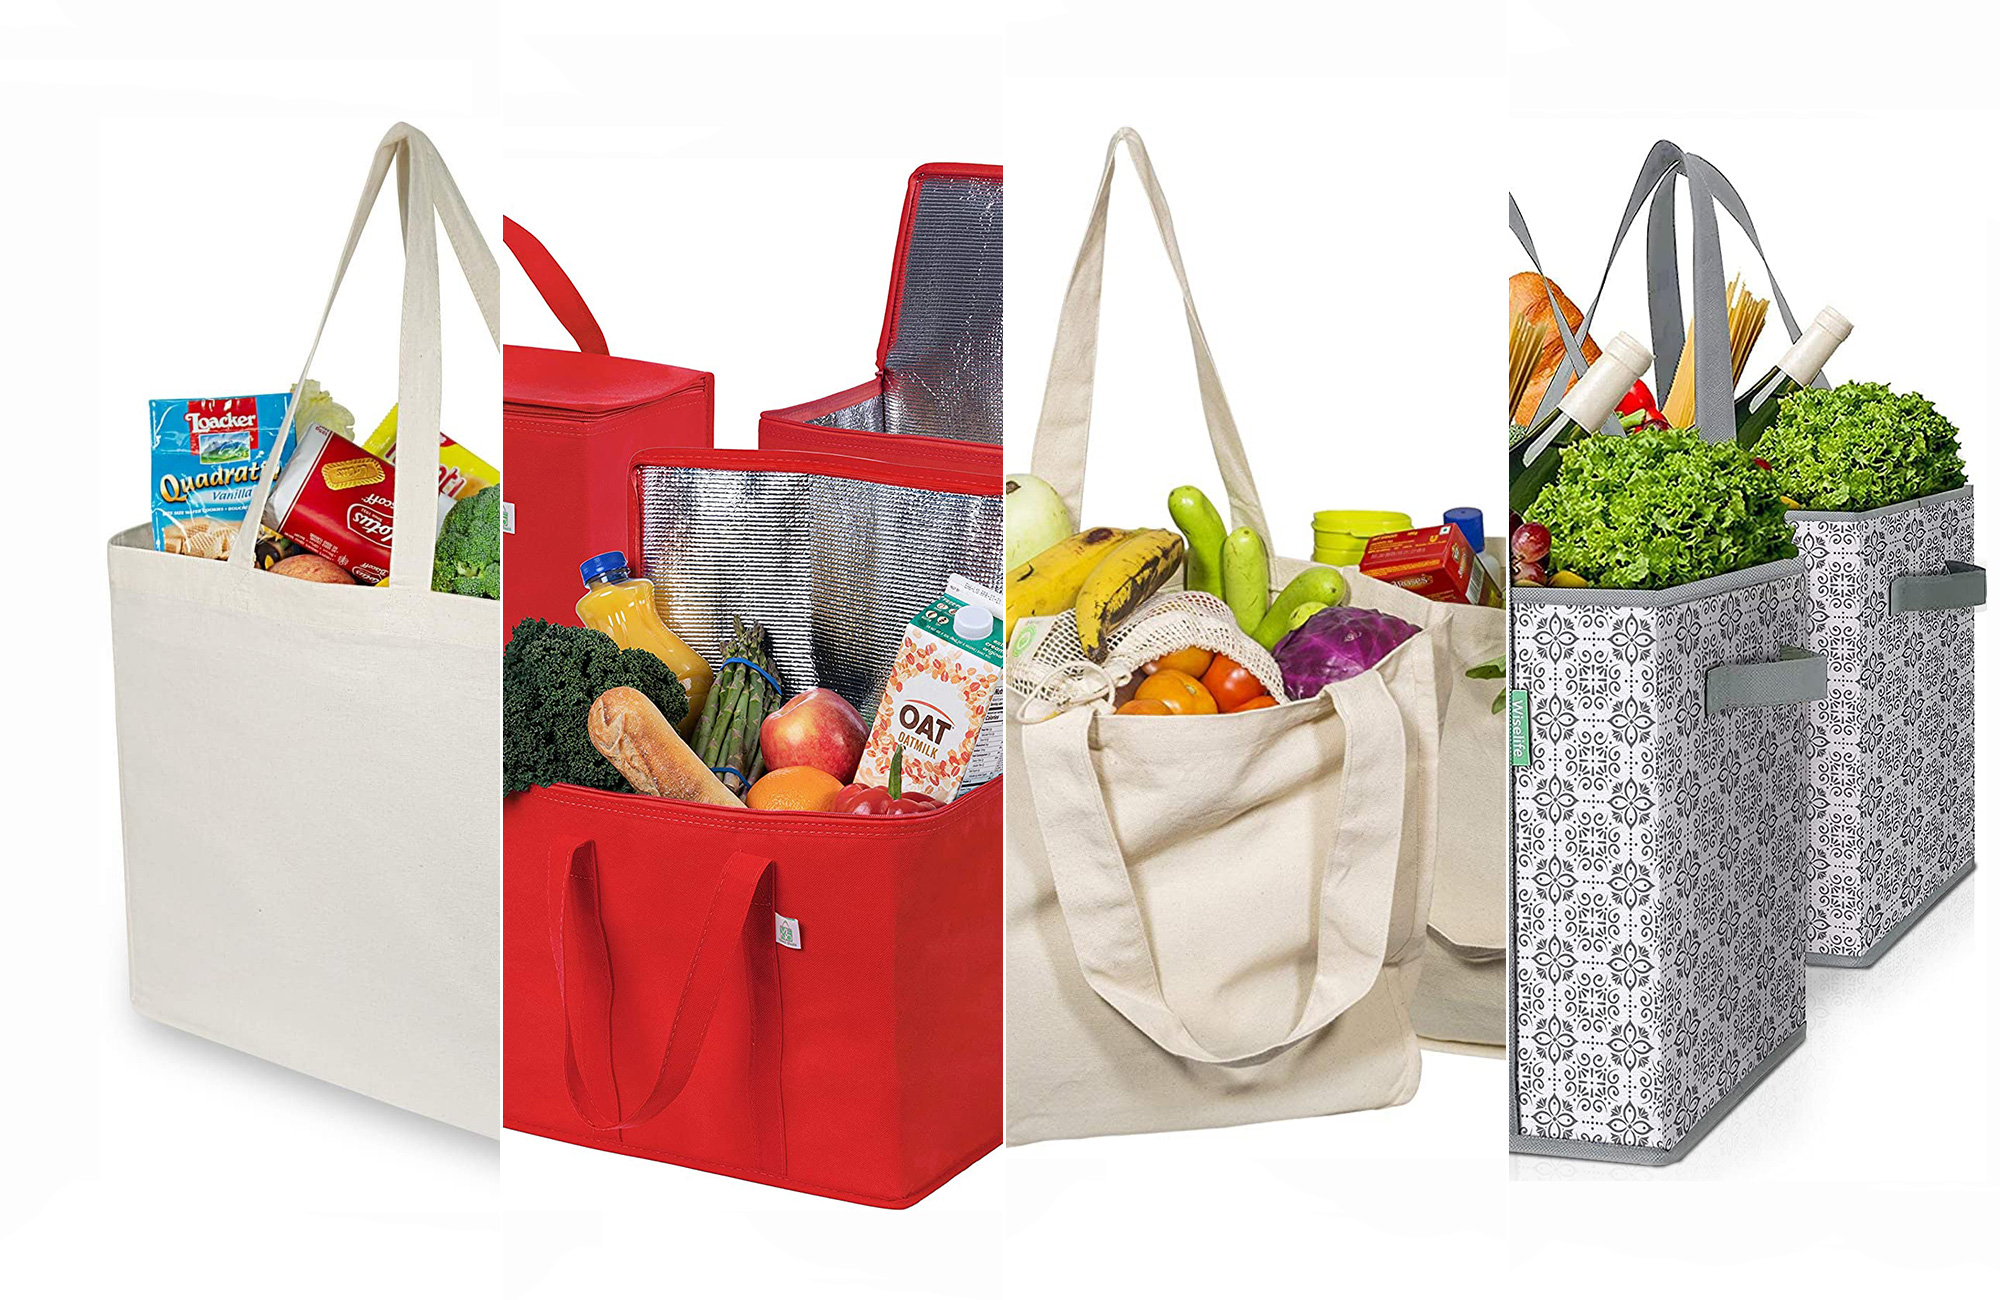 How to Clean Reusable Grocery Bags & Tips to Disinfect Bags